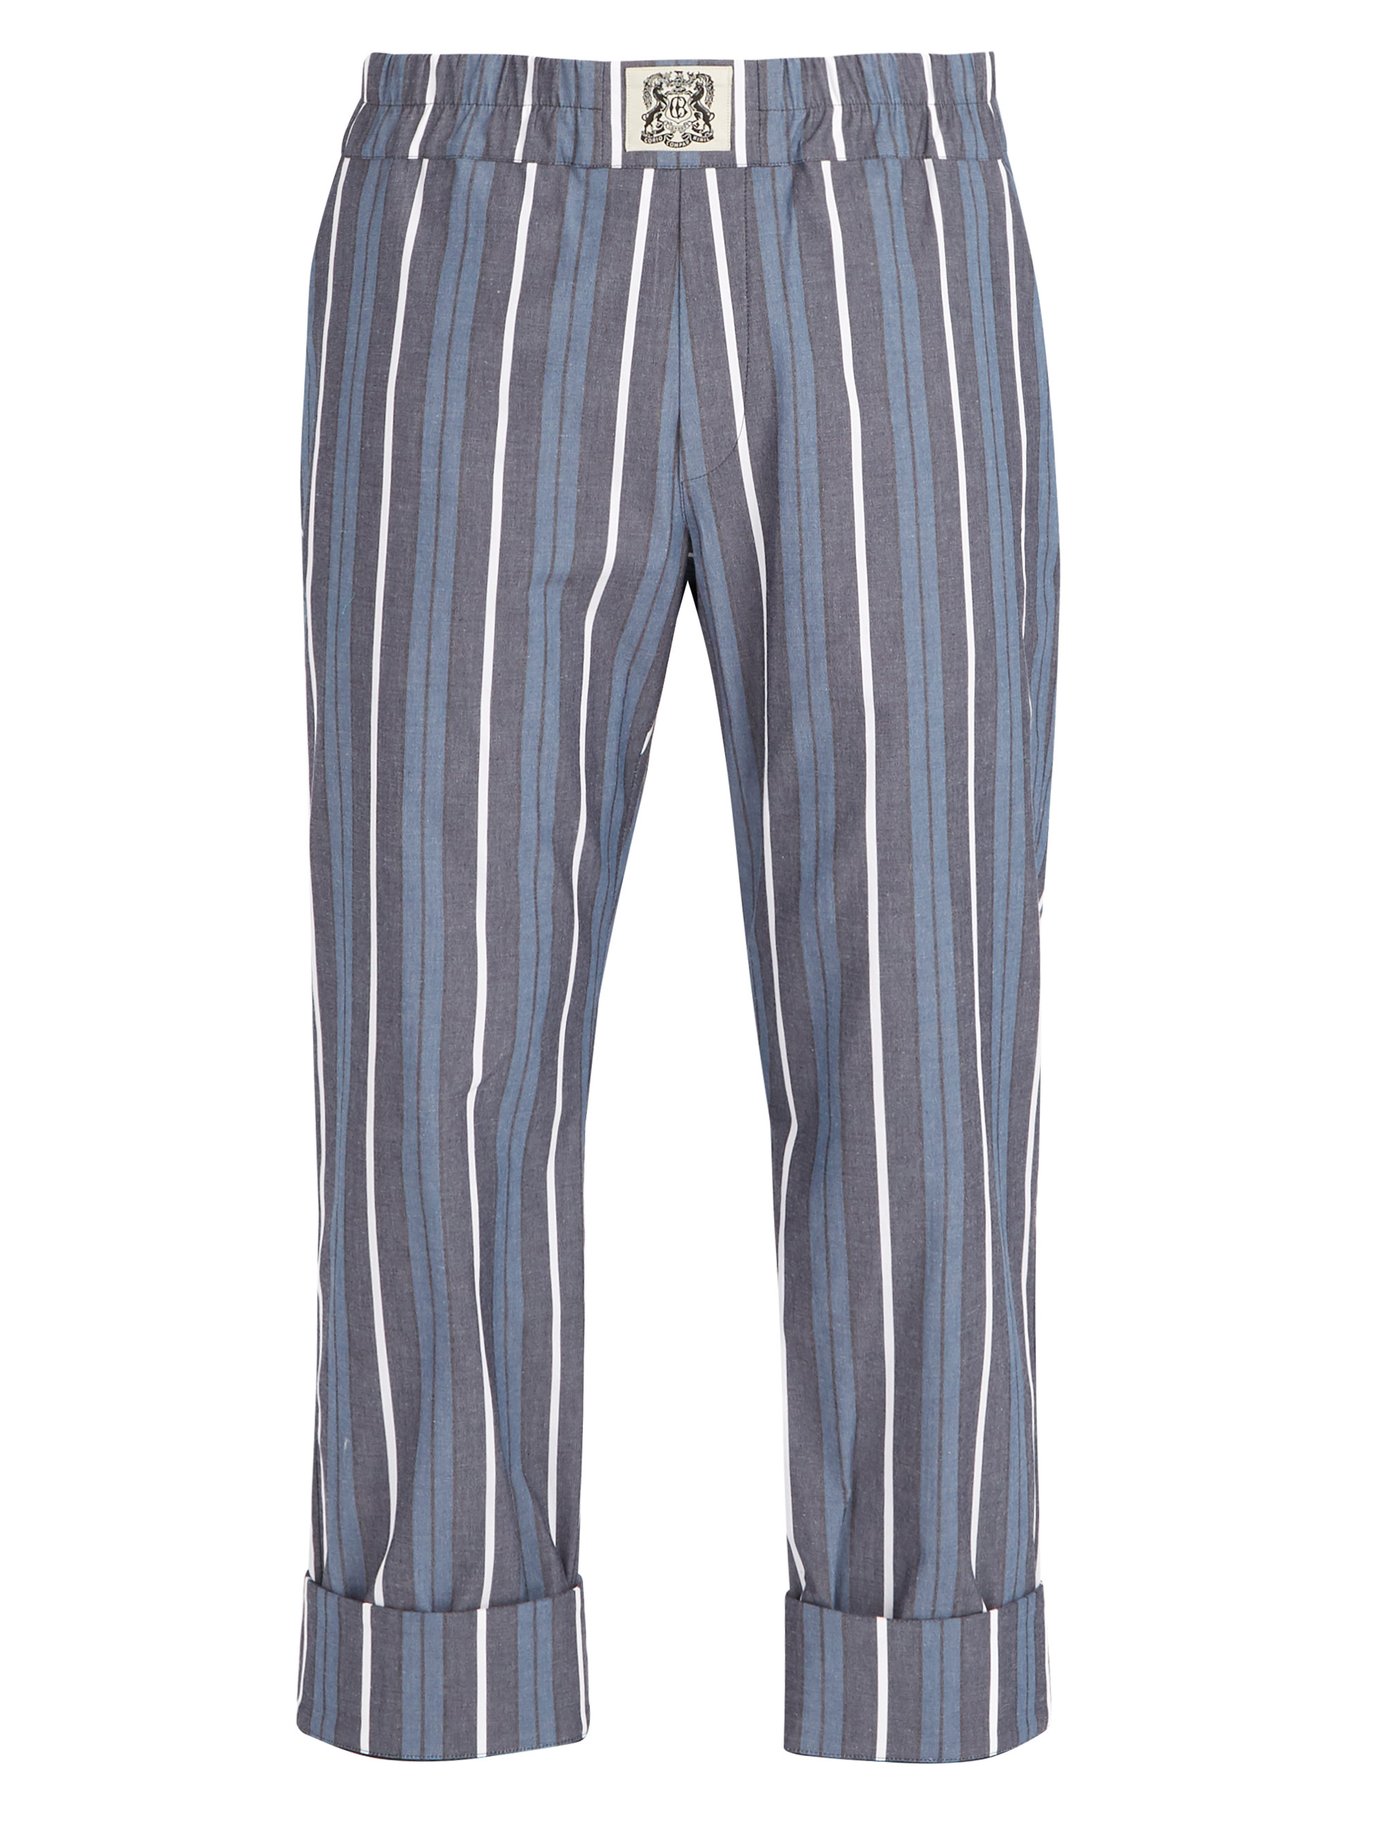 CONNOLLY STRIPED COTTON BLEND TROUSERS